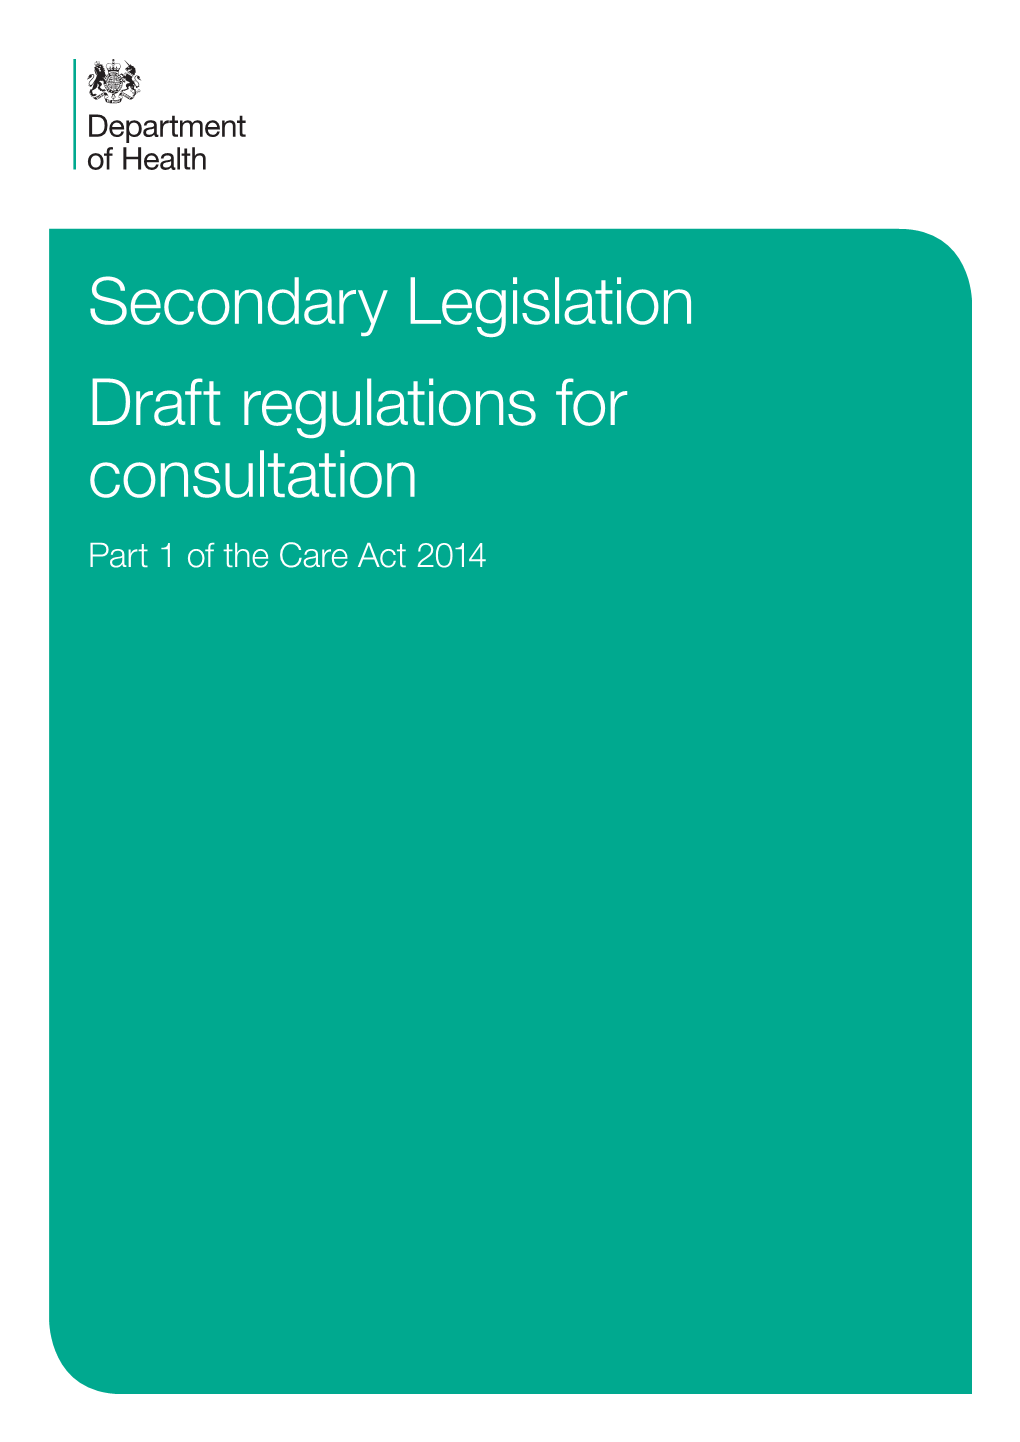 Secondary Legislation Draft Regulations for Consultation Part 1 of the Care Act 2014 Contents